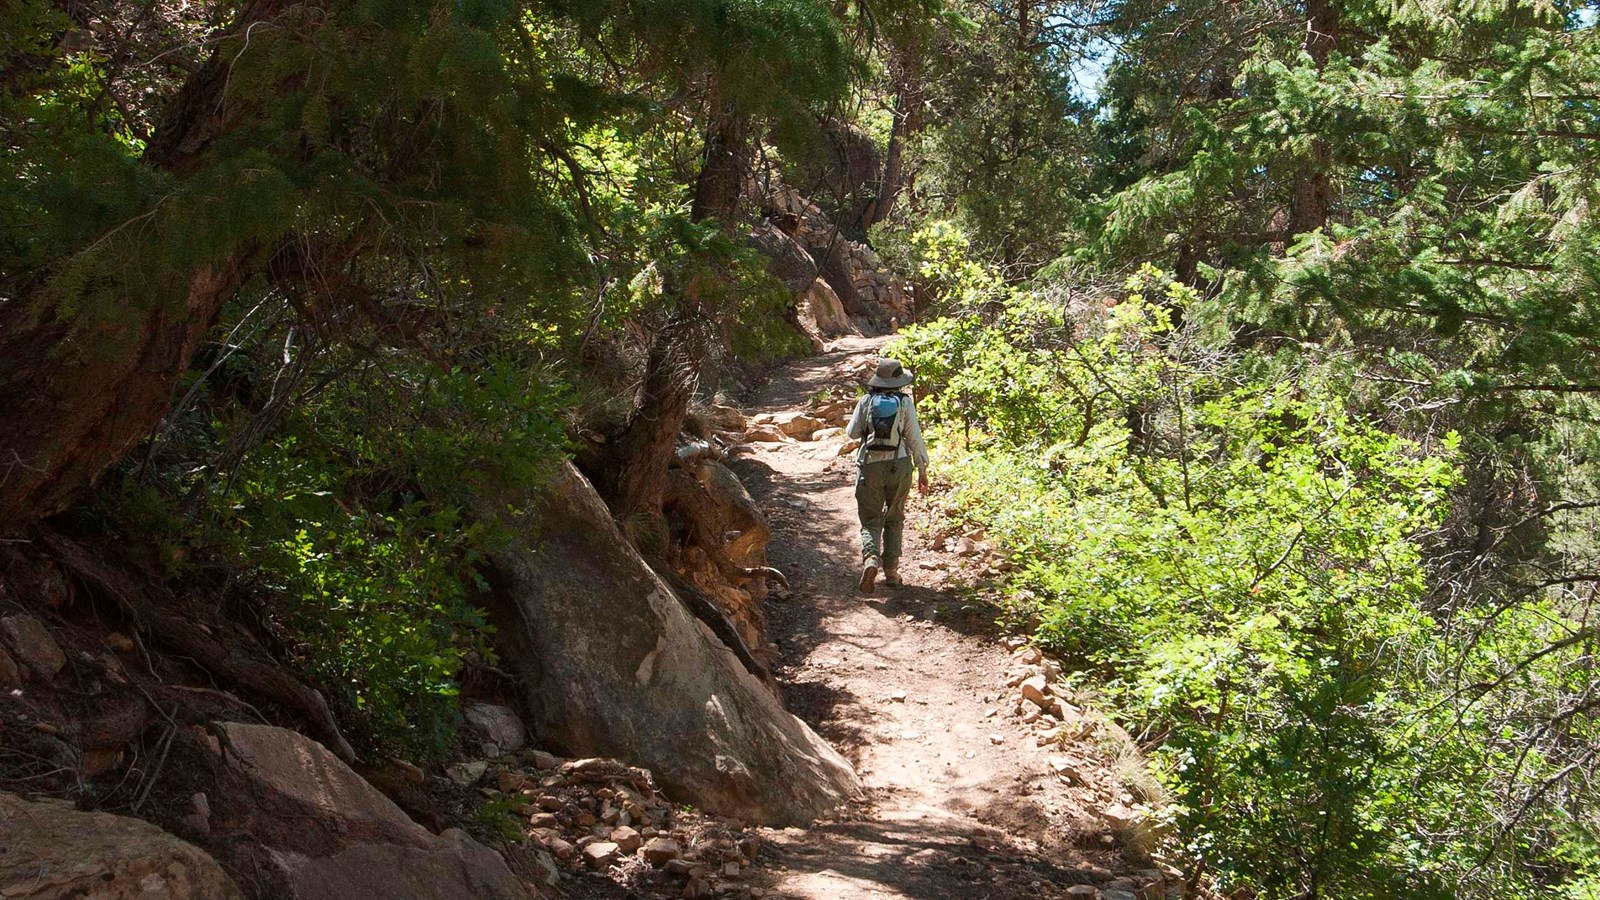 Hiker on narrow, rocky trail surrounded by trees and canyon views.